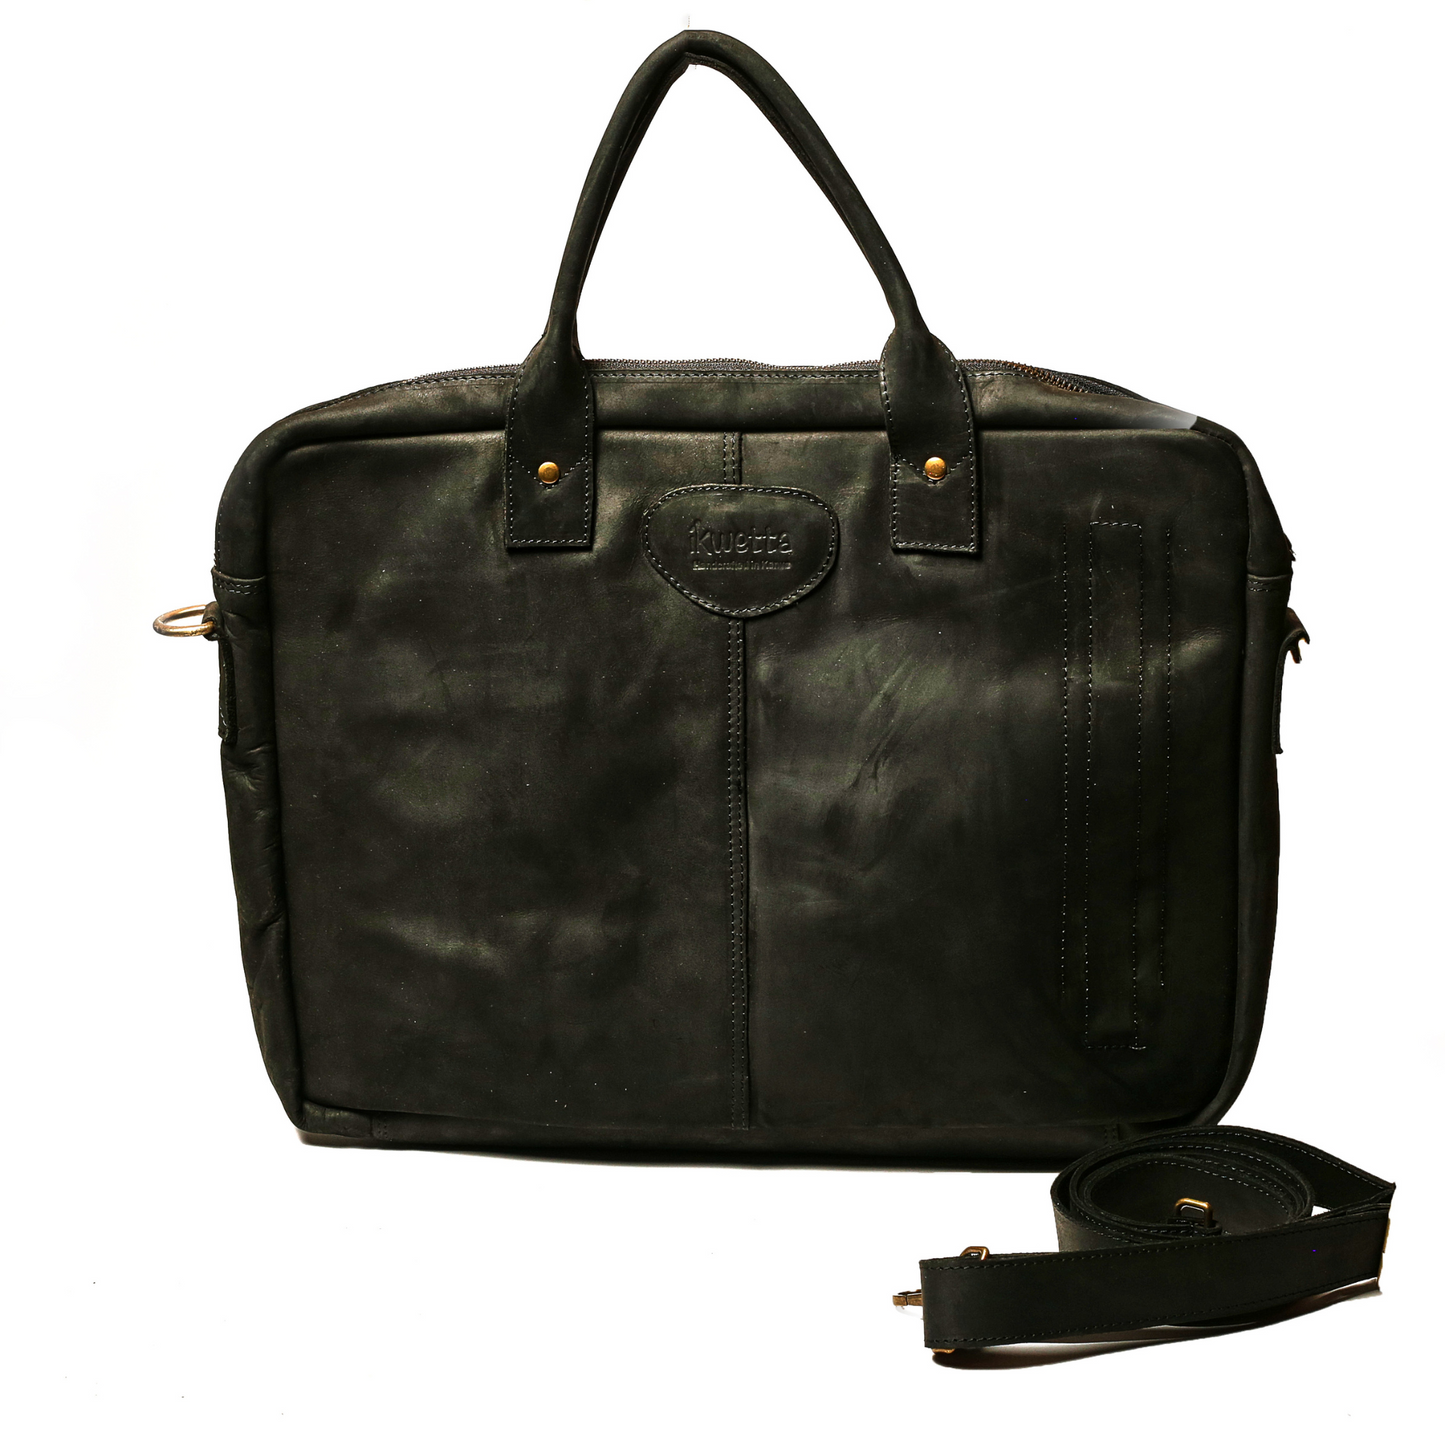 Louis laptop bag in black oil pull up leather